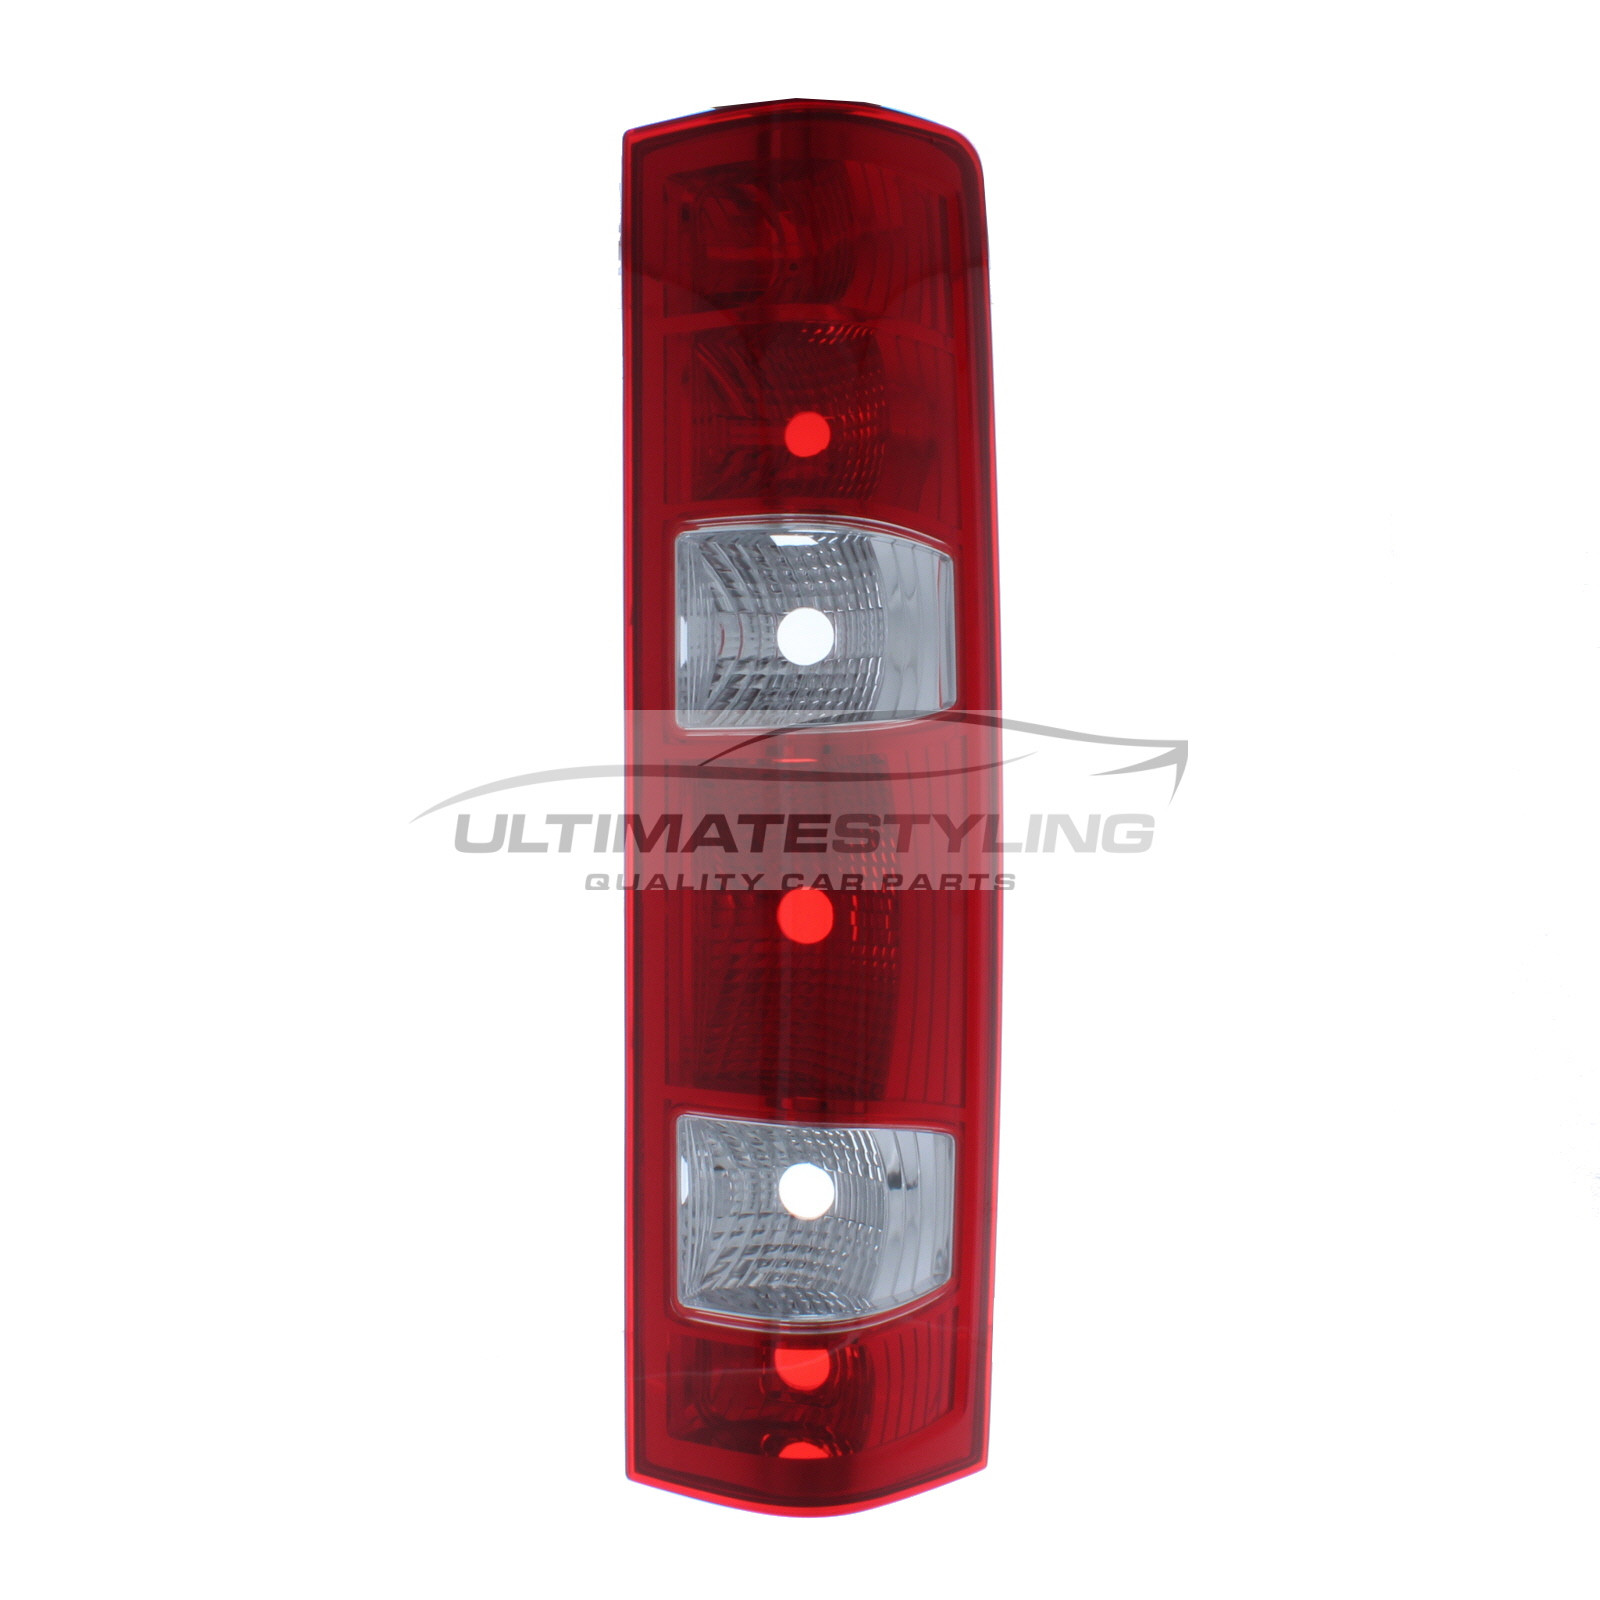 Iveco Daily Rear Light / Tail Light - Drivers Side (RH), Rear - Non-LED